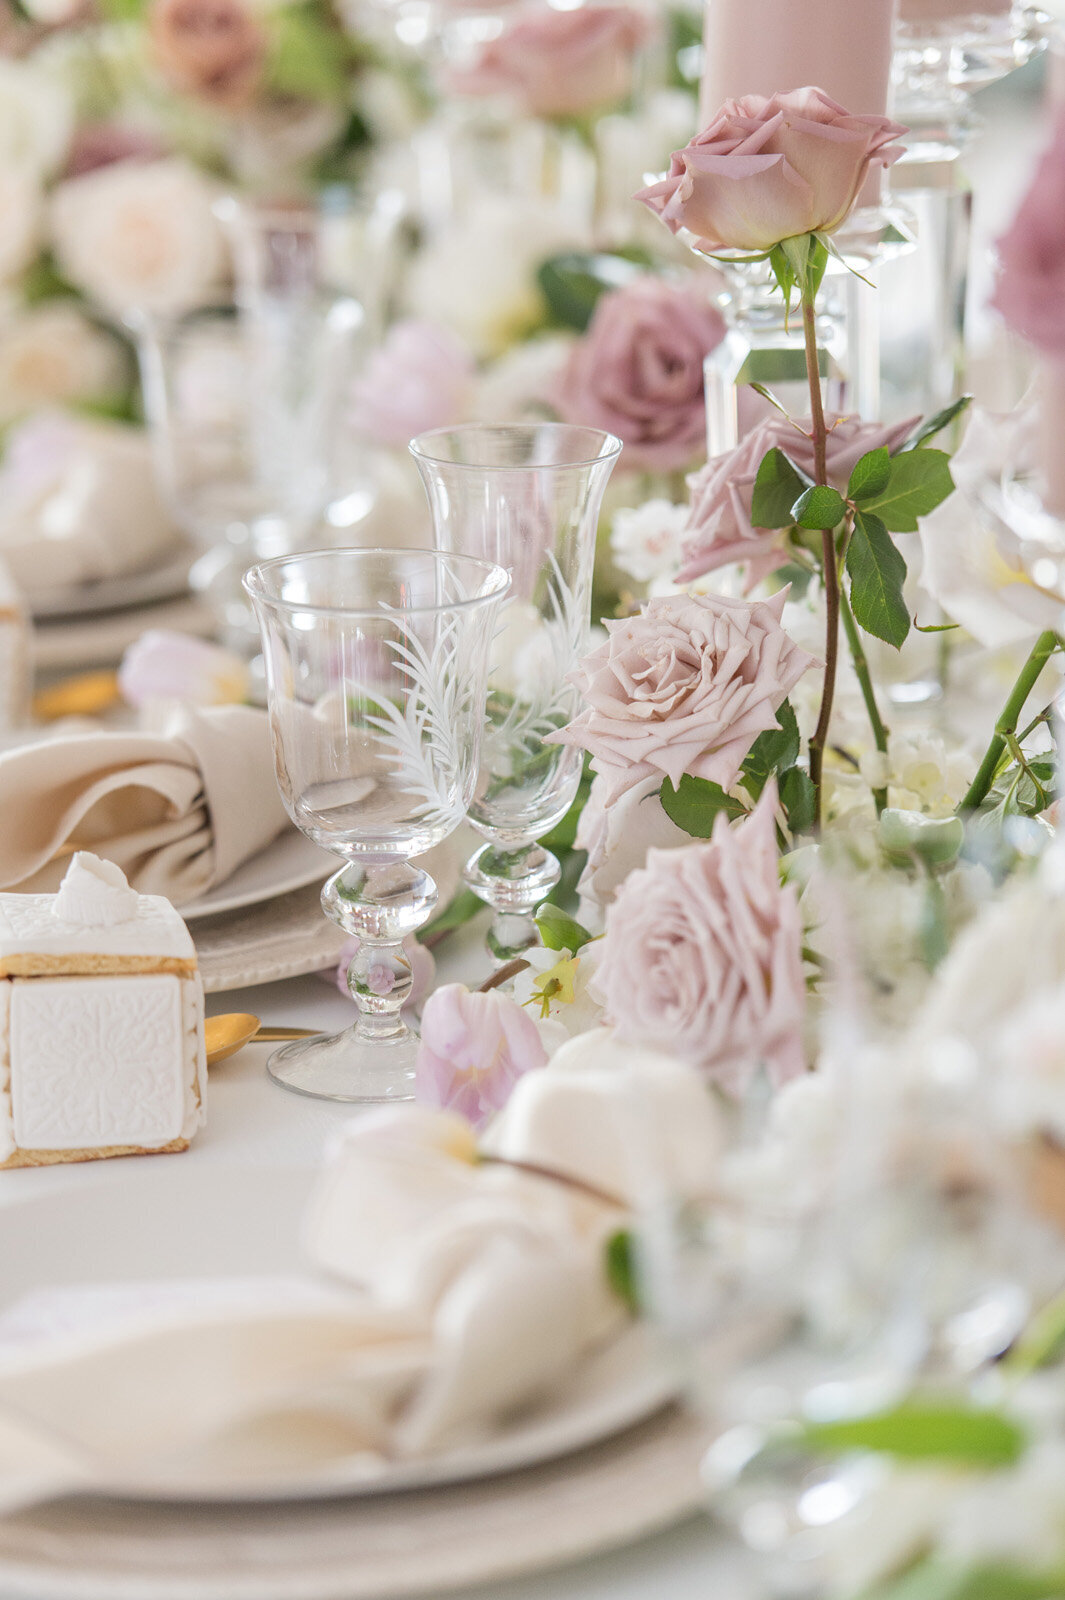 Diana-Pires-Events-Fiore-Wedluxe-26